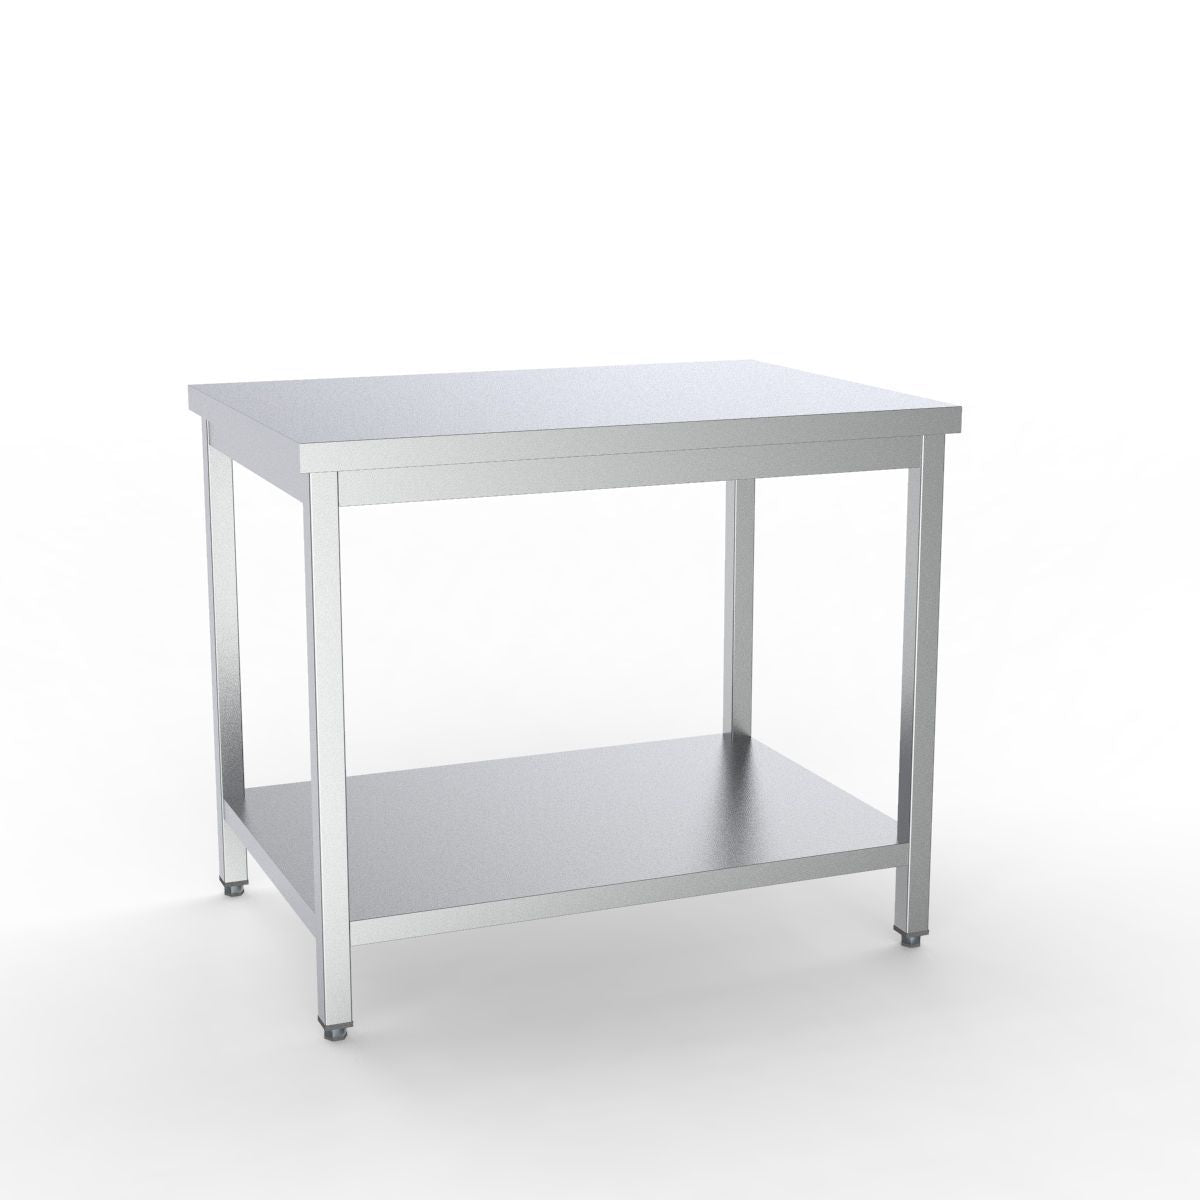 Combisteel Full 430 Stainless Steel 600 Line Worktable With Shelf 800mm Wide - 7333.0062